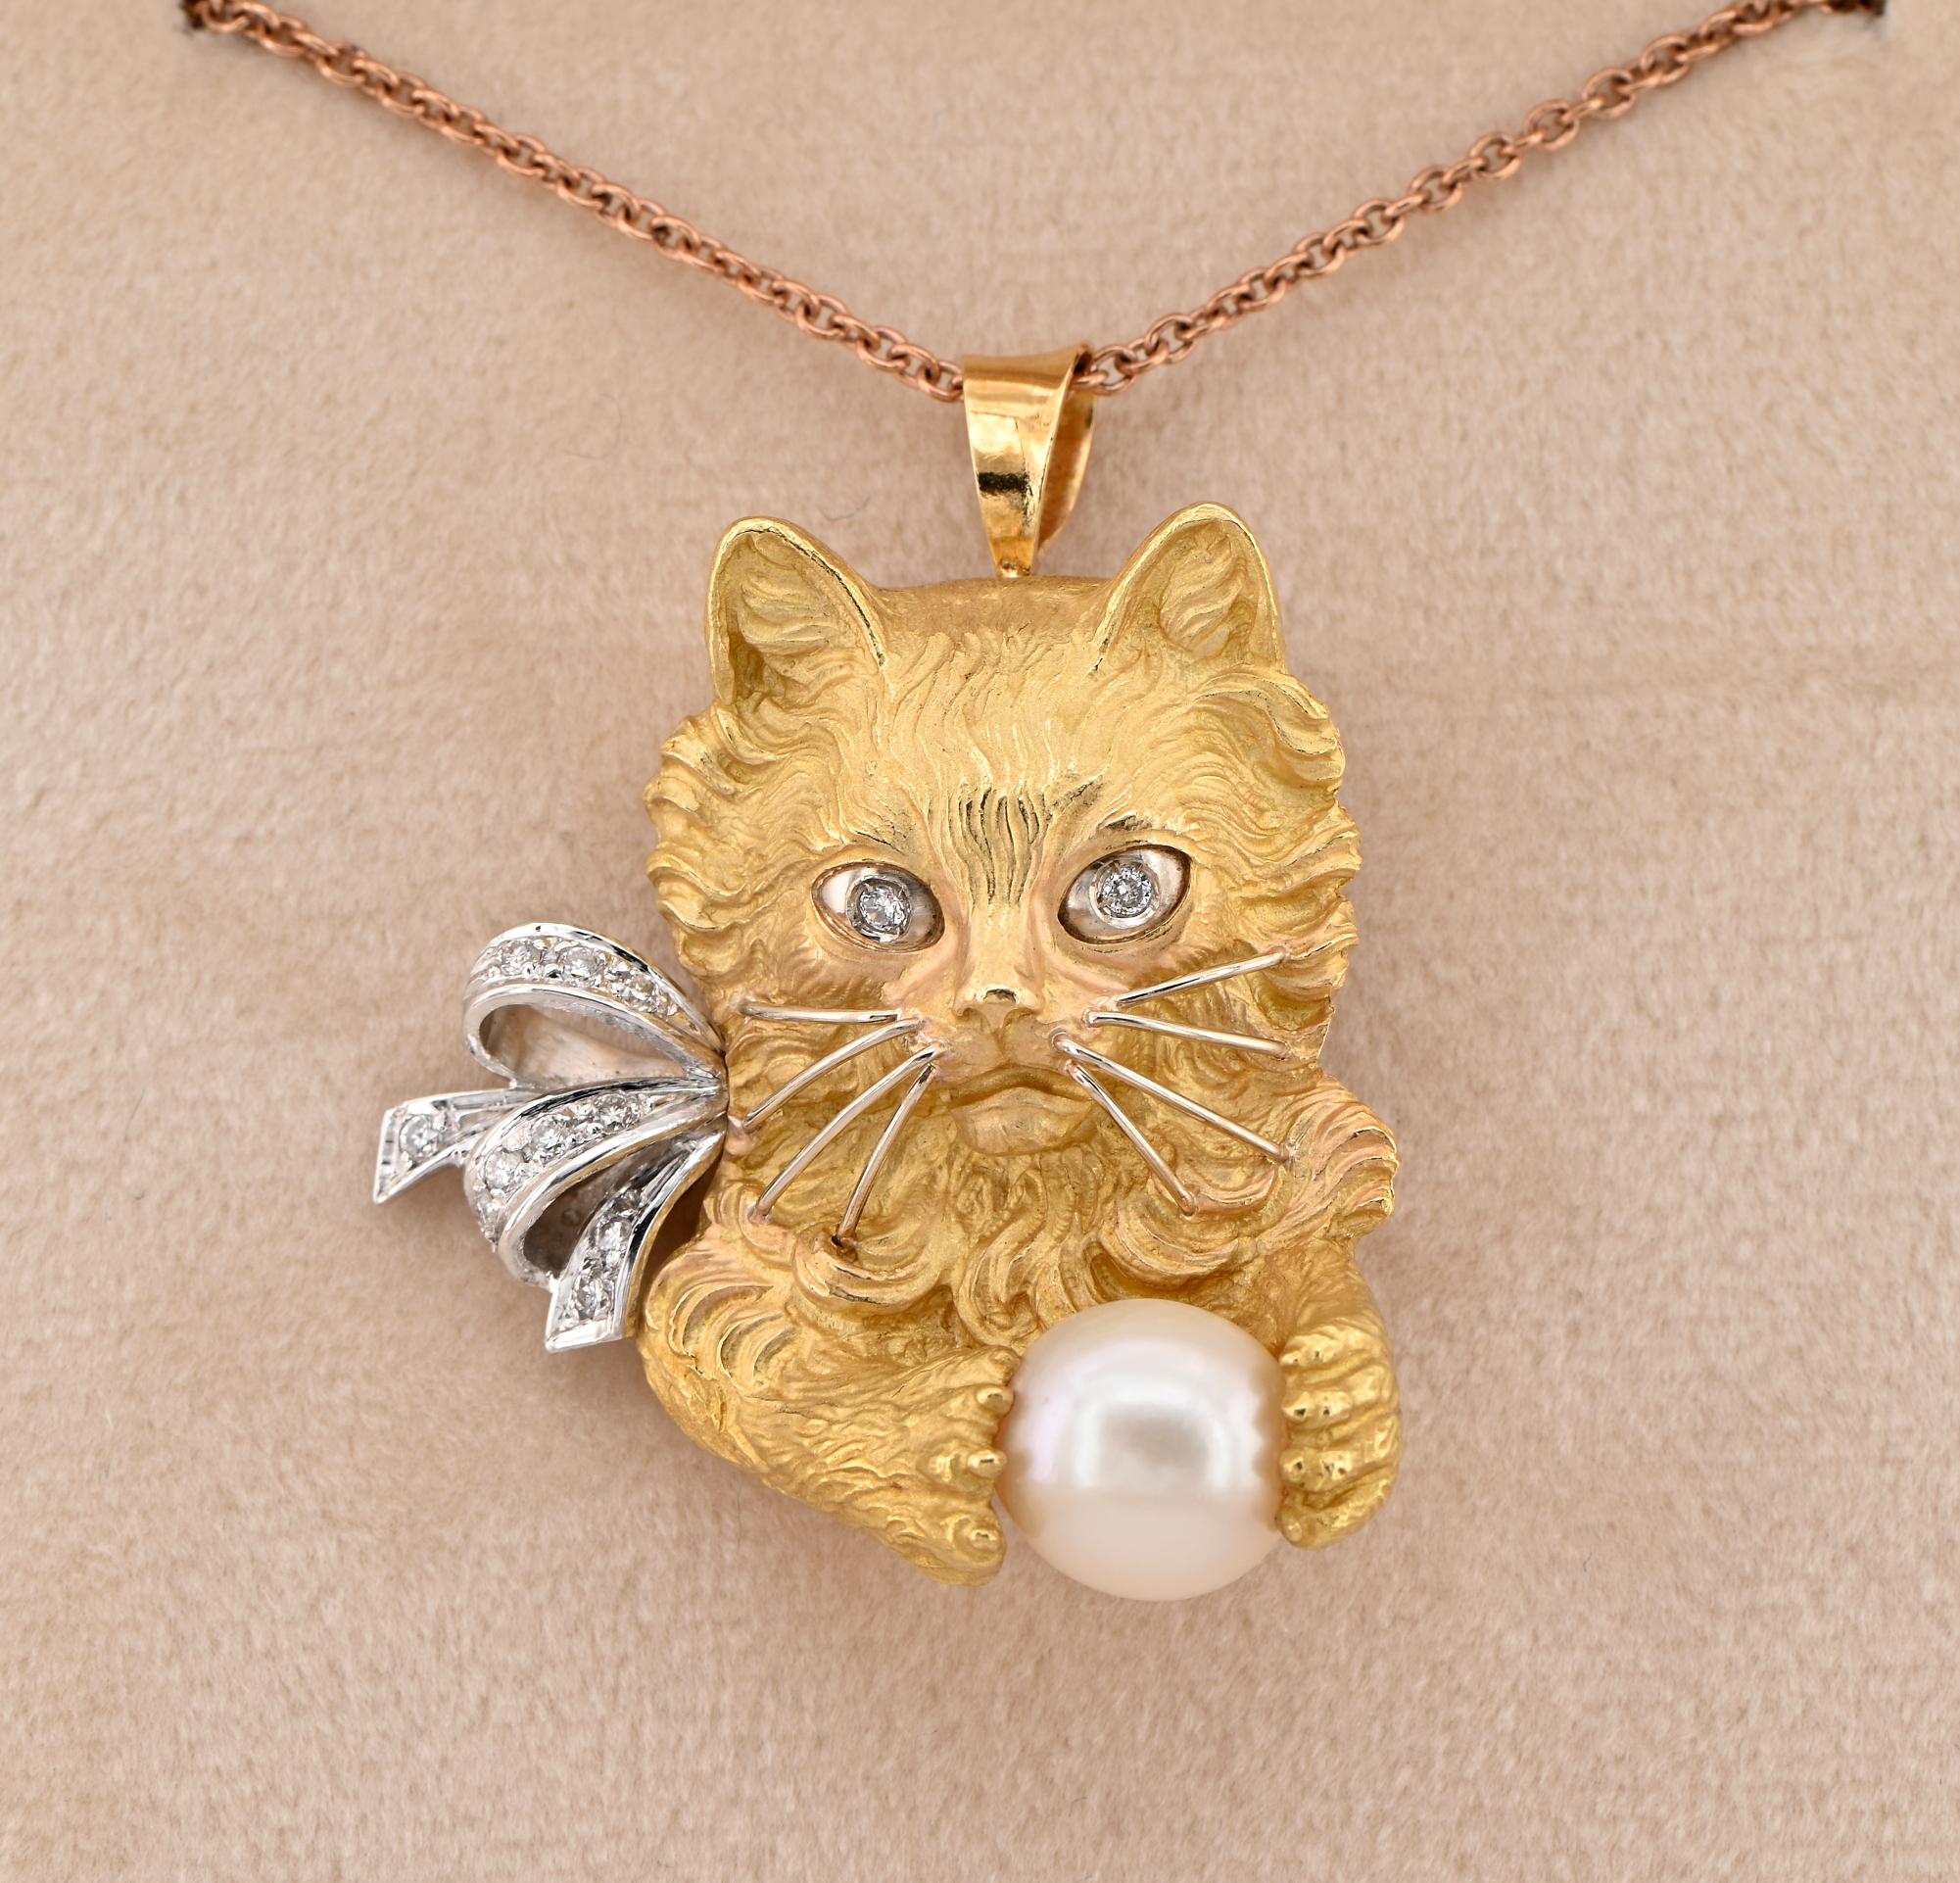 Cat’s Print in Heart
This unique brooch pendant is 1950 ca
Amazing sculptured past art work, realistically rendered and richly detailed of heavy solid 18 Kt gold, 22.4 grams!
It features a beautiful sculptured and hand carved cat playing with a ball